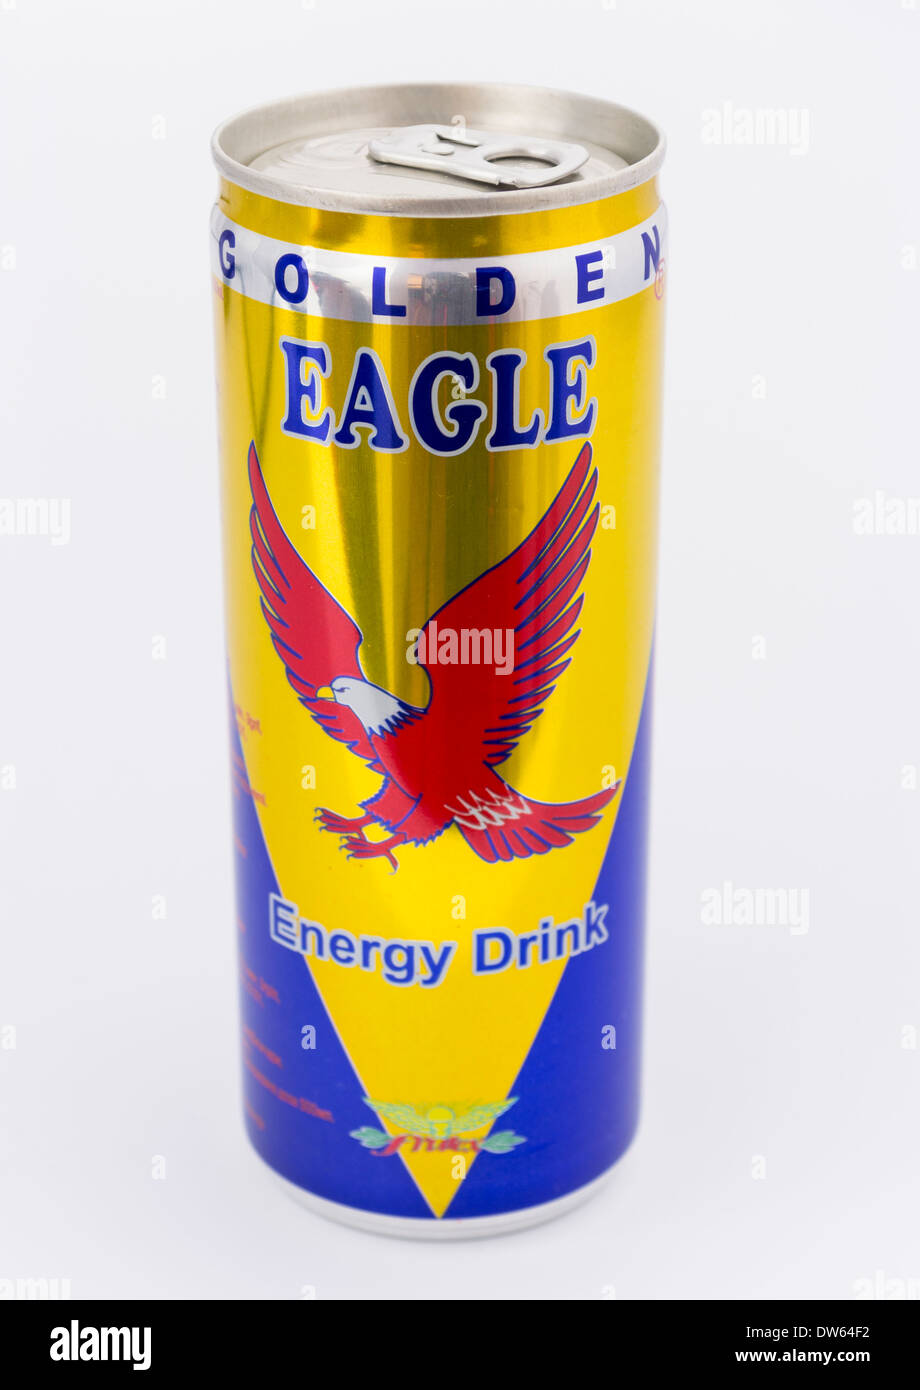 Golden Eagle energy drink can Stock Photo - Alamy